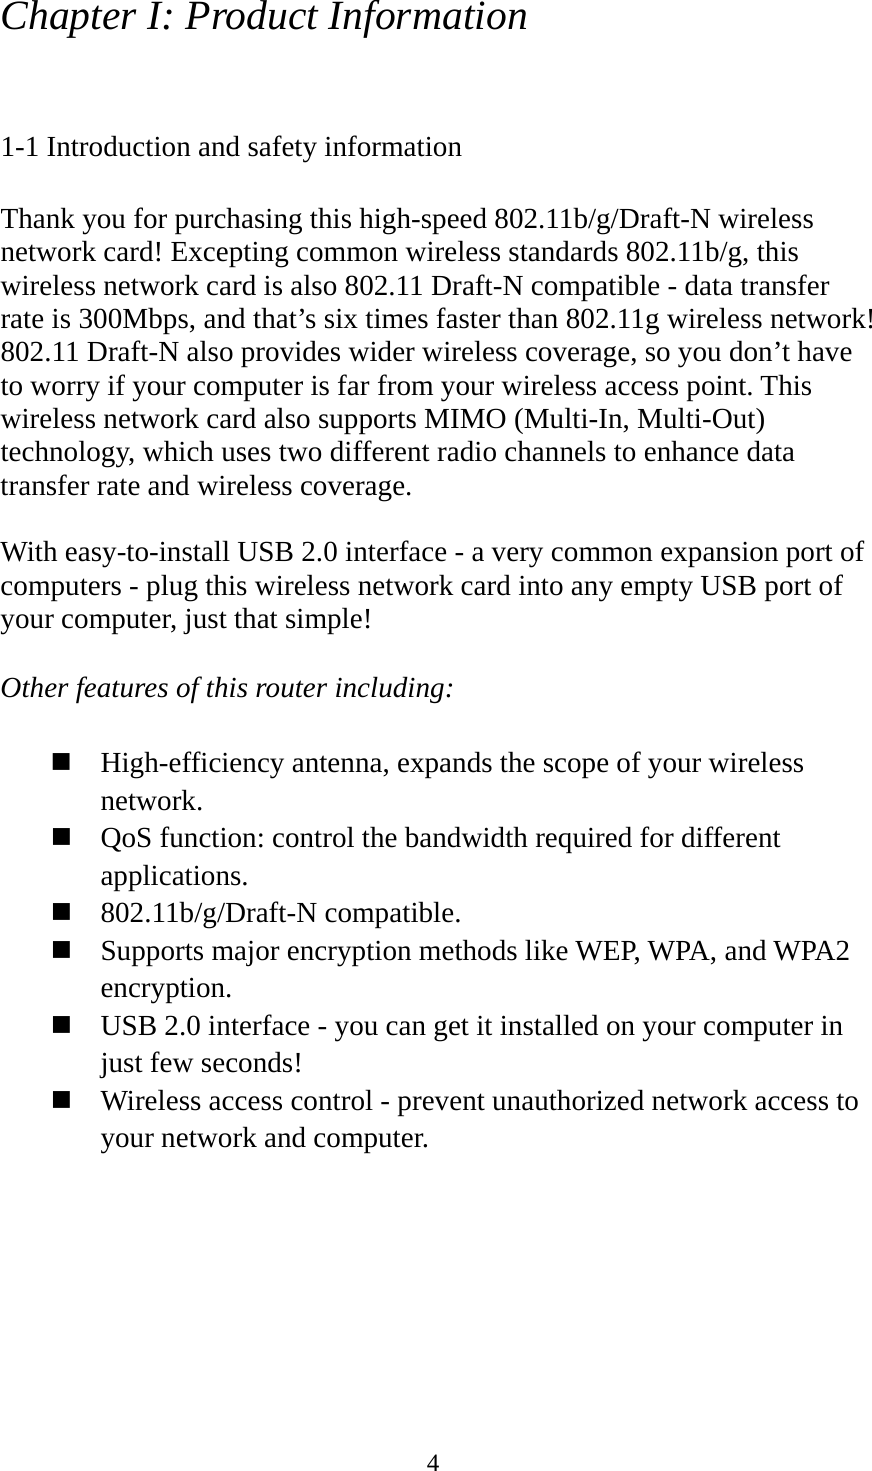  4Chapter I: Product Information  1-1 Introduction and safety information  Thank you for purchasing this high-speed 802.11b/g/Draft-N wireless network card! Excepting common wireless standards 802.11b/g, this wireless network card is also 802.11 Draft-N compatible - data transfer rate is 300Mbps, and that’s six times faster than 802.11g wireless network! 802.11 Draft-N also provides wider wireless coverage, so you don’t have to worry if your computer is far from your wireless access point. This wireless network card also supports MIMO (Multi-In, Multi-Out) technology, which uses two different radio channels to enhance data transfer rate and wireless coverage.  With easy-to-install USB 2.0 interface - a very common expansion port of computers - plug this wireless network card into any empty USB port of your computer, just that simple!  Other features of this router including:   High-efficiency antenna, expands the scope of your wireless network.  QoS function: control the bandwidth required for different applications.  802.11b/g/Draft-N compatible.  Supports major encryption methods like WEP, WPA, and WPA2 encryption.  USB 2.0 interface - you can get it installed on your computer in just few seconds!  Wireless access control - prevent unauthorized network access to your network and computer. 